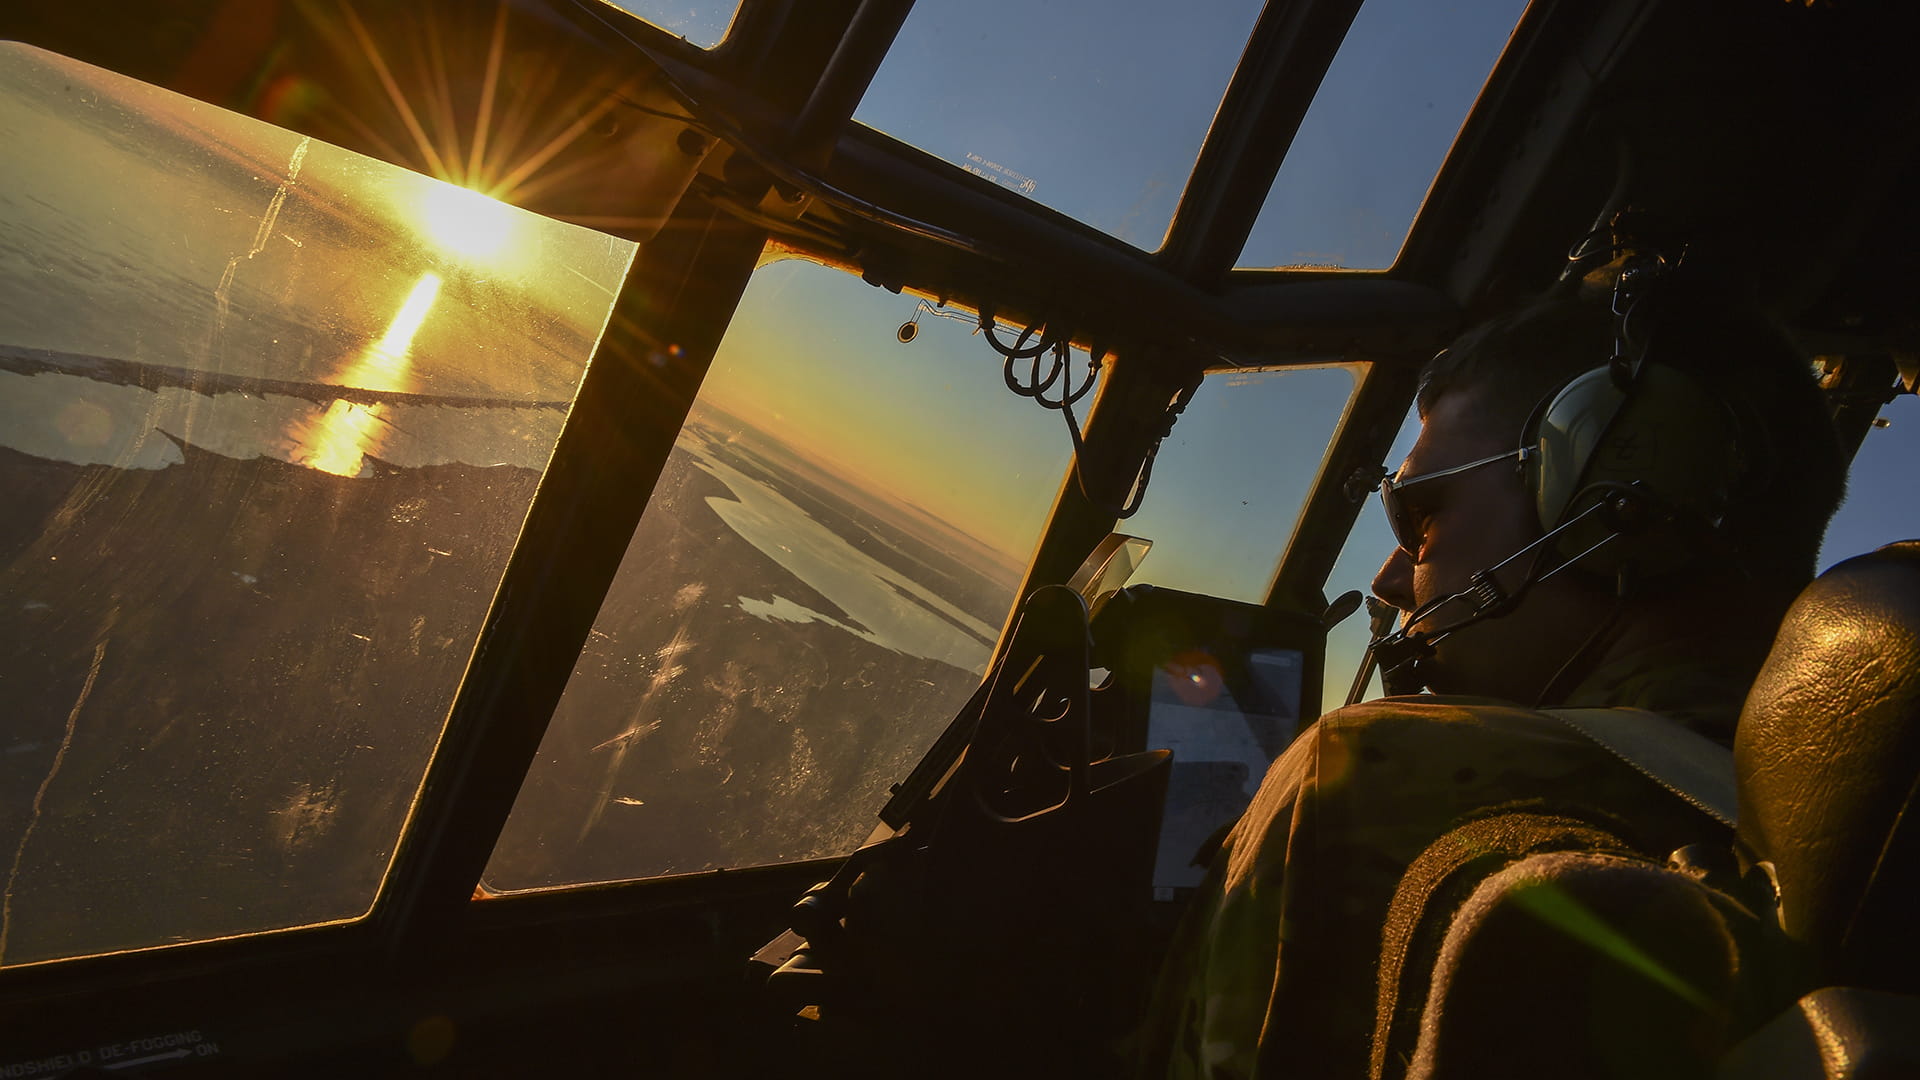 Pilot looking out of aircraft